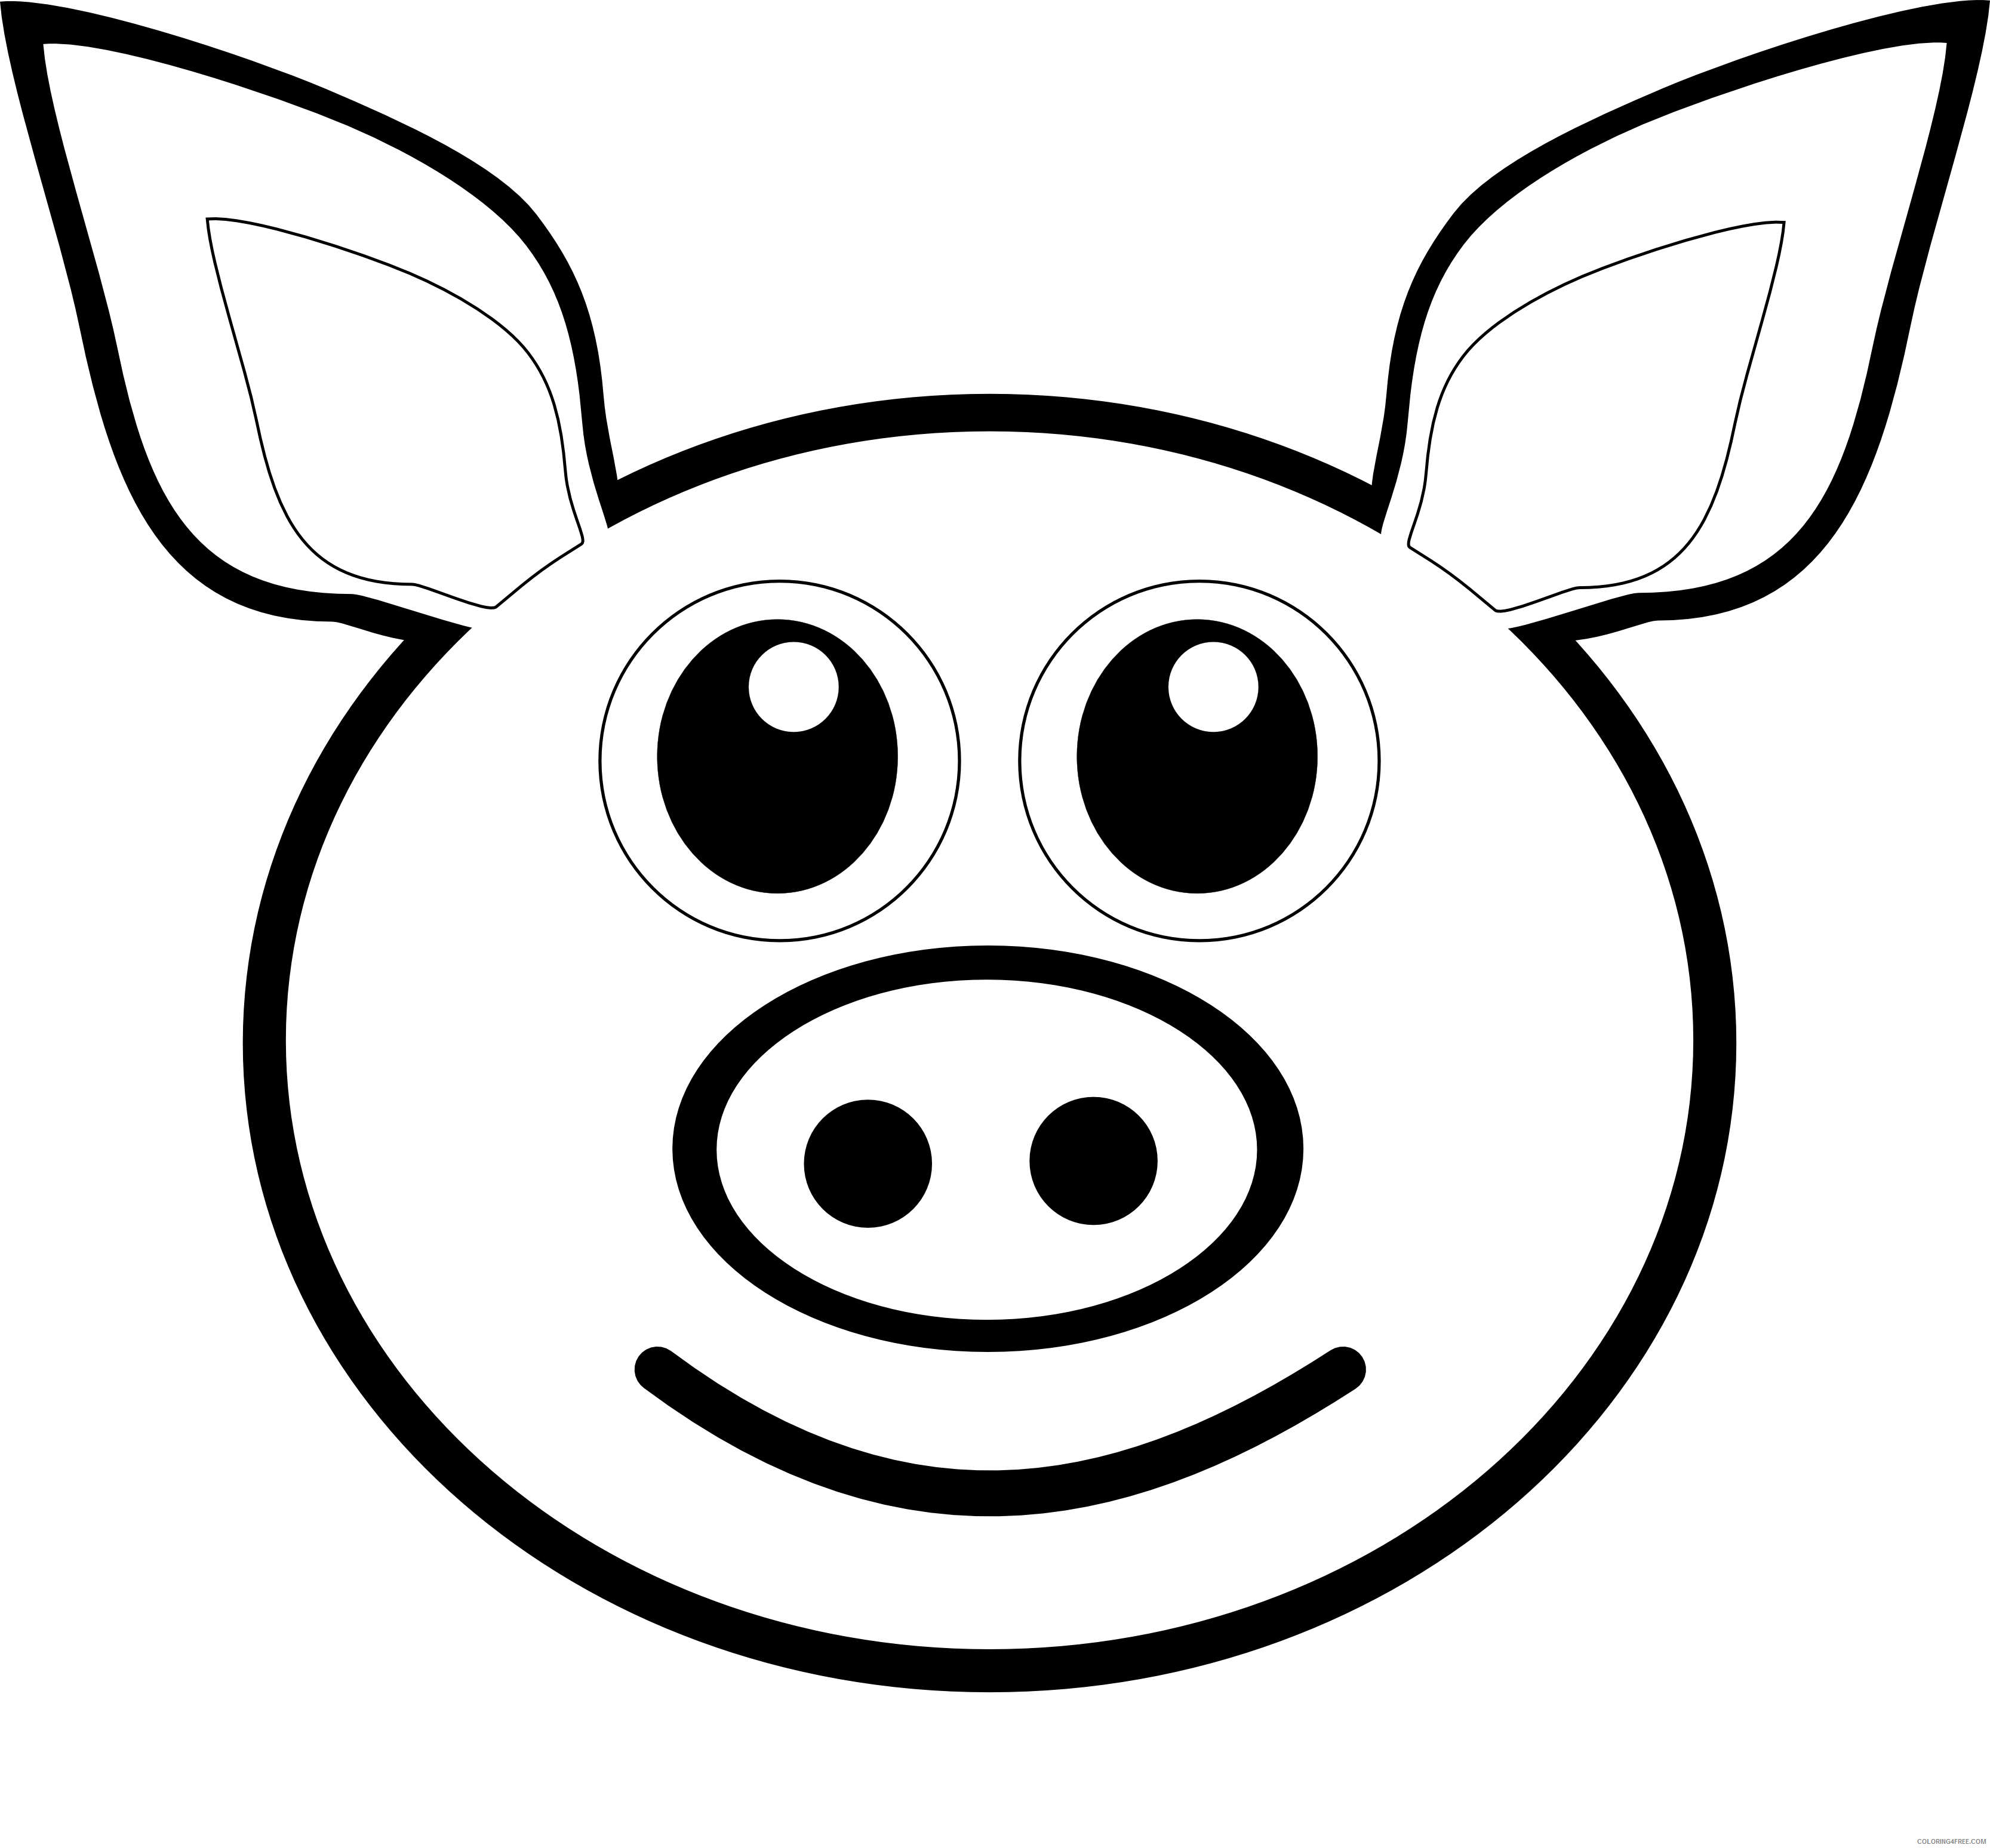 Pig Face Coloring Pages Pig Face 7caq6bkca Png Printable Coloring4free Coloring4free Com - how to get free robux theepic pig